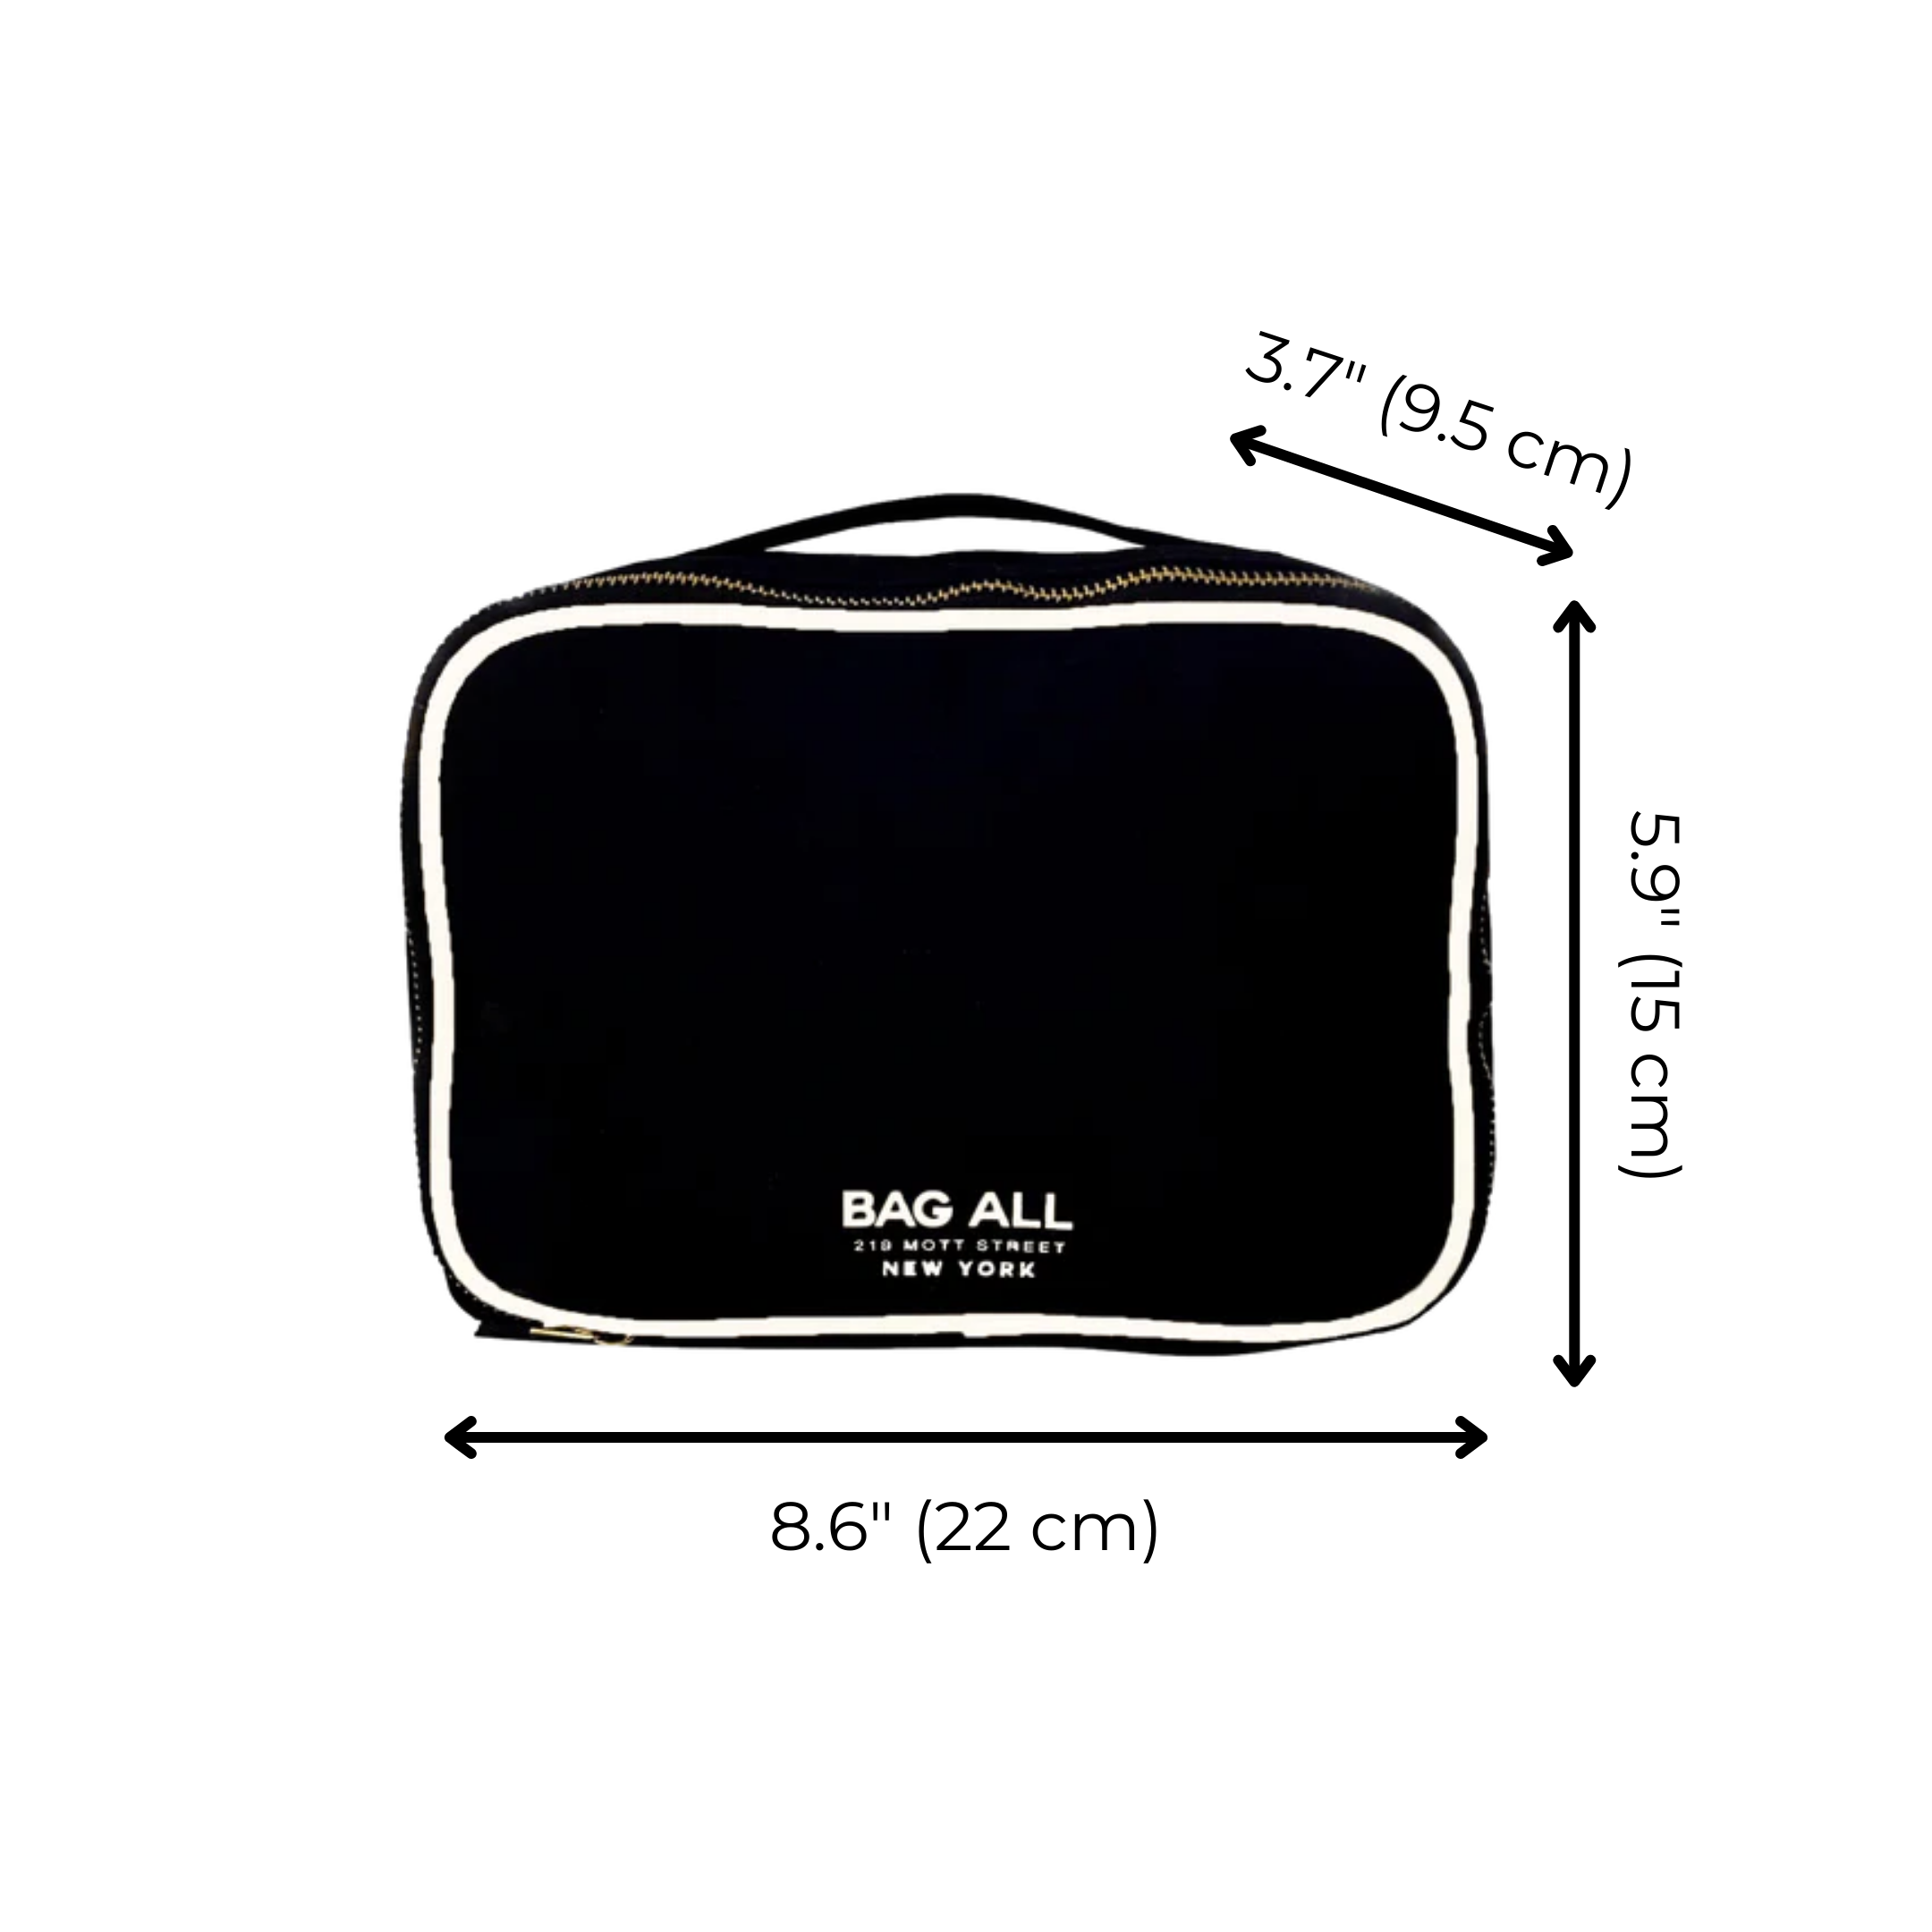 Double Sided Toiletry Case, Black | Bag-all